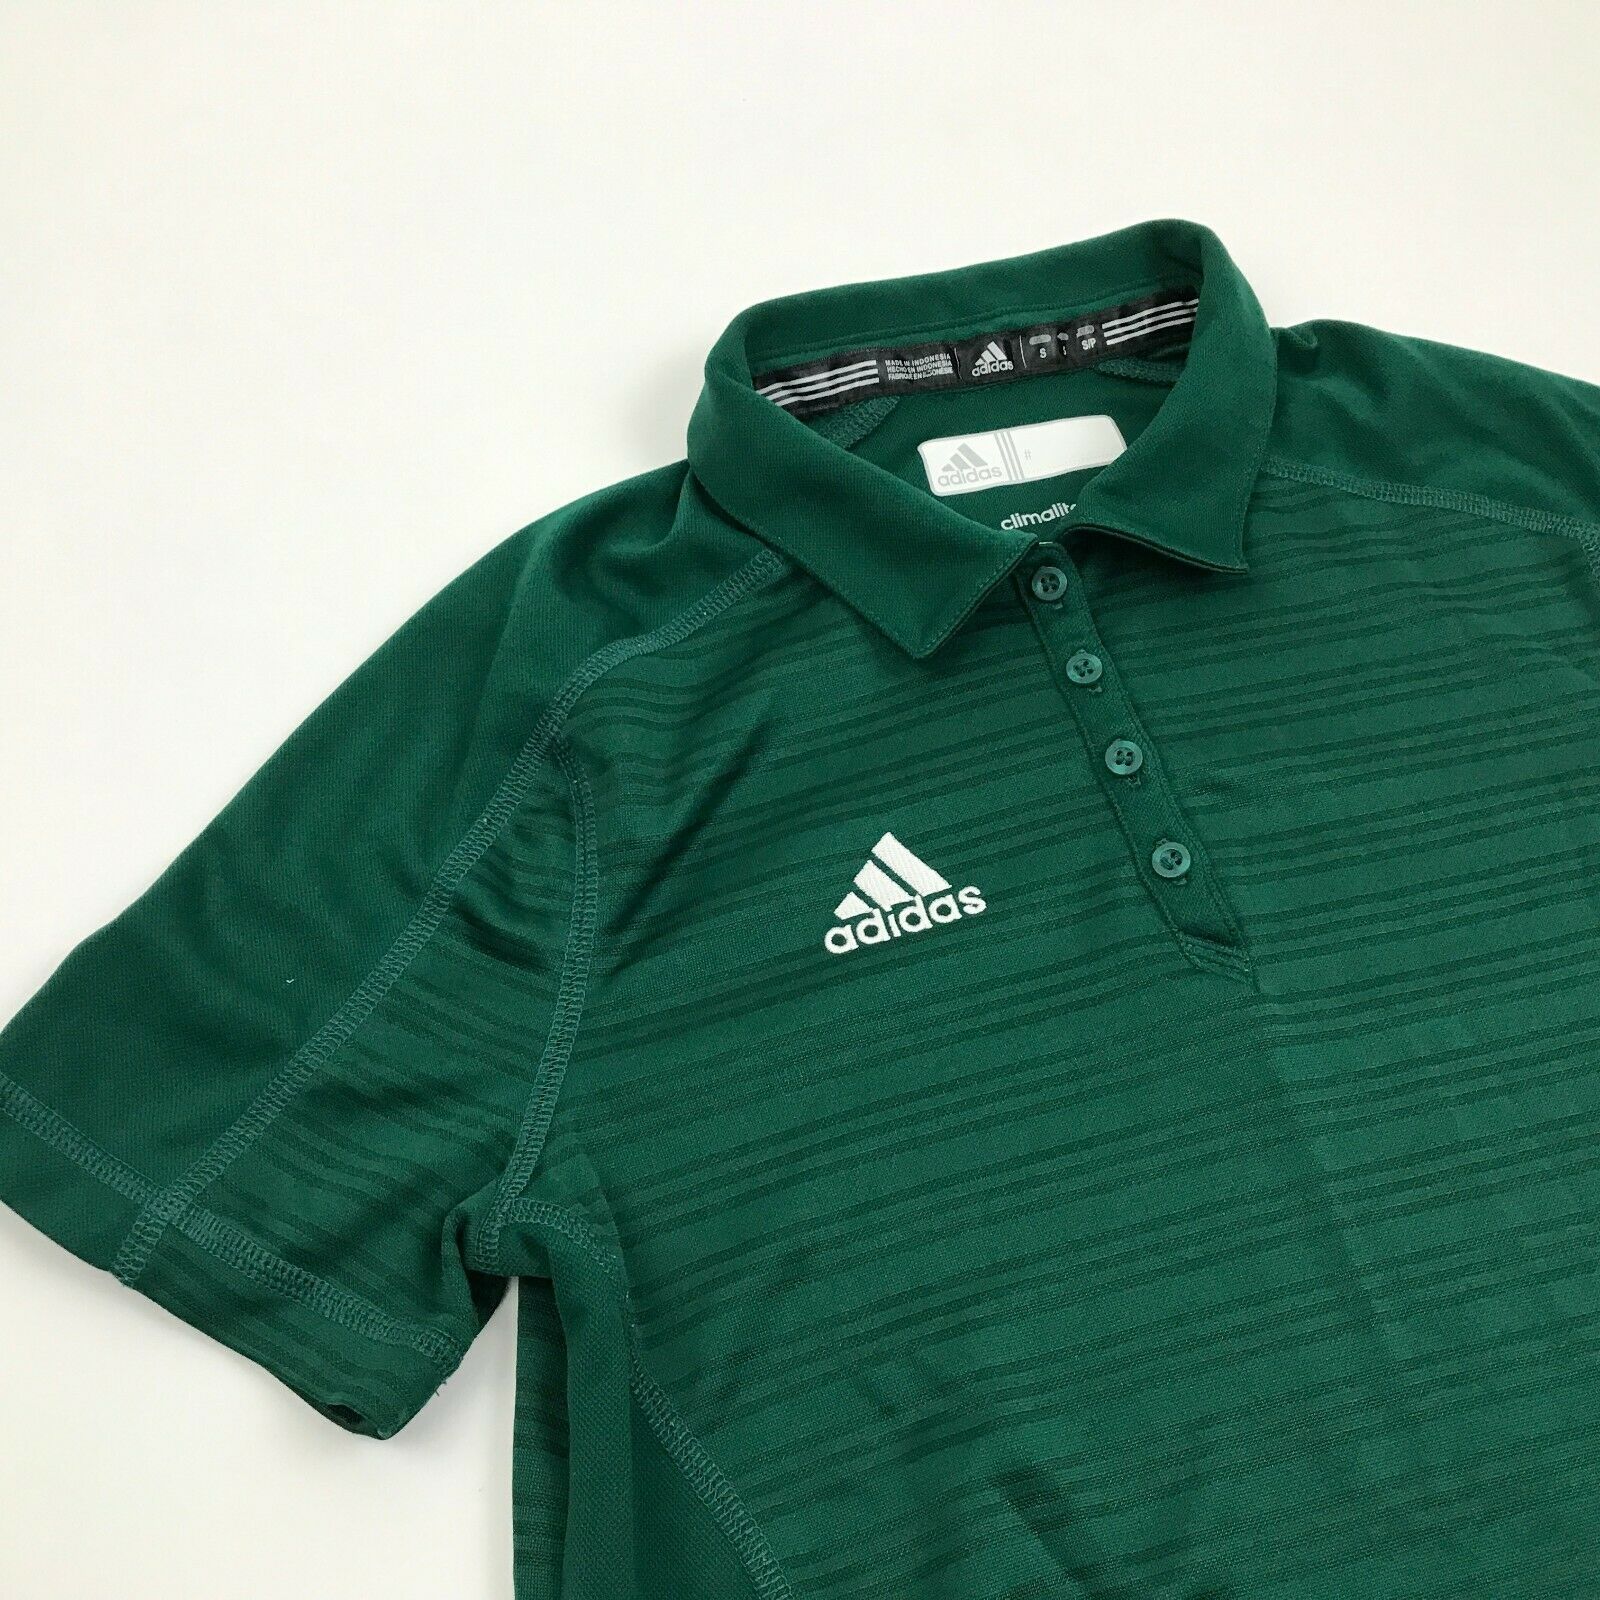 Adidas Dry Fit Polo Women's Size S Small Spruce Green Shirt Perforated ...